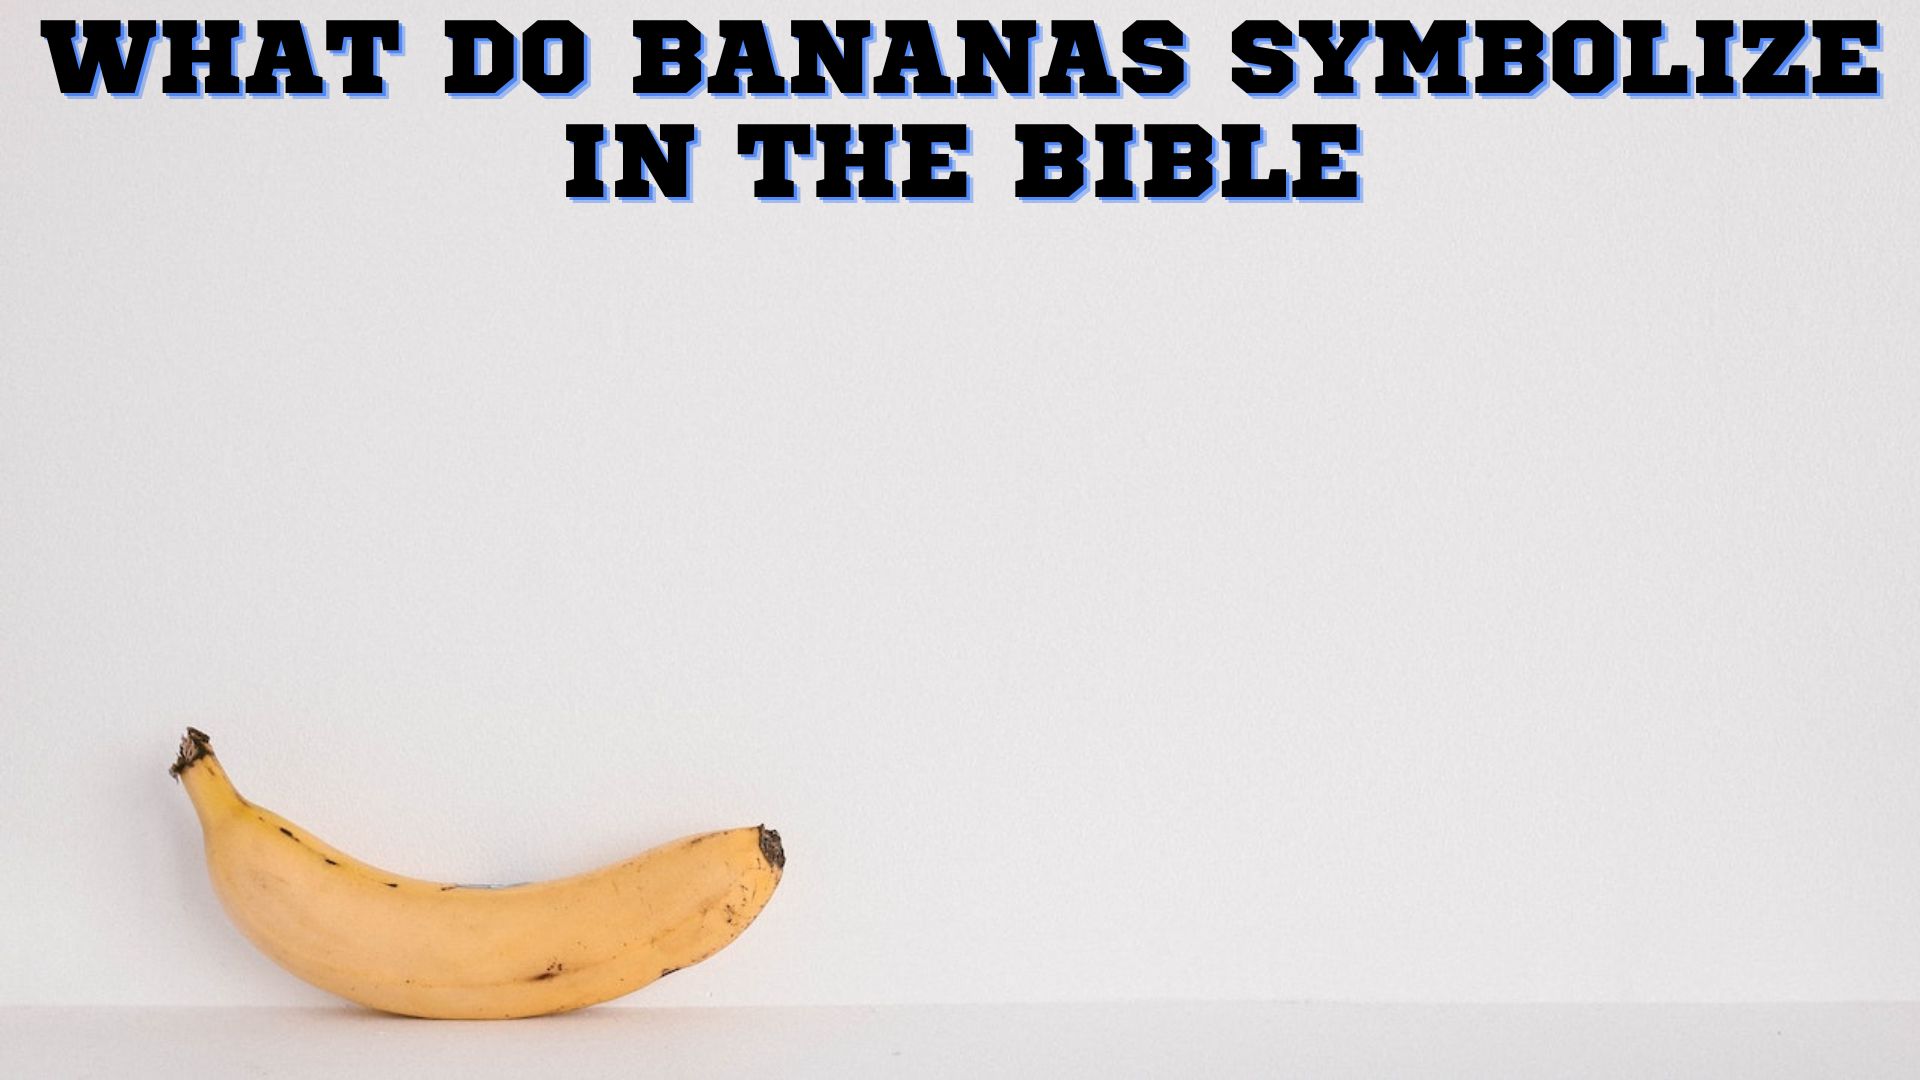 What Do Bananas Symbolize In The Bible?